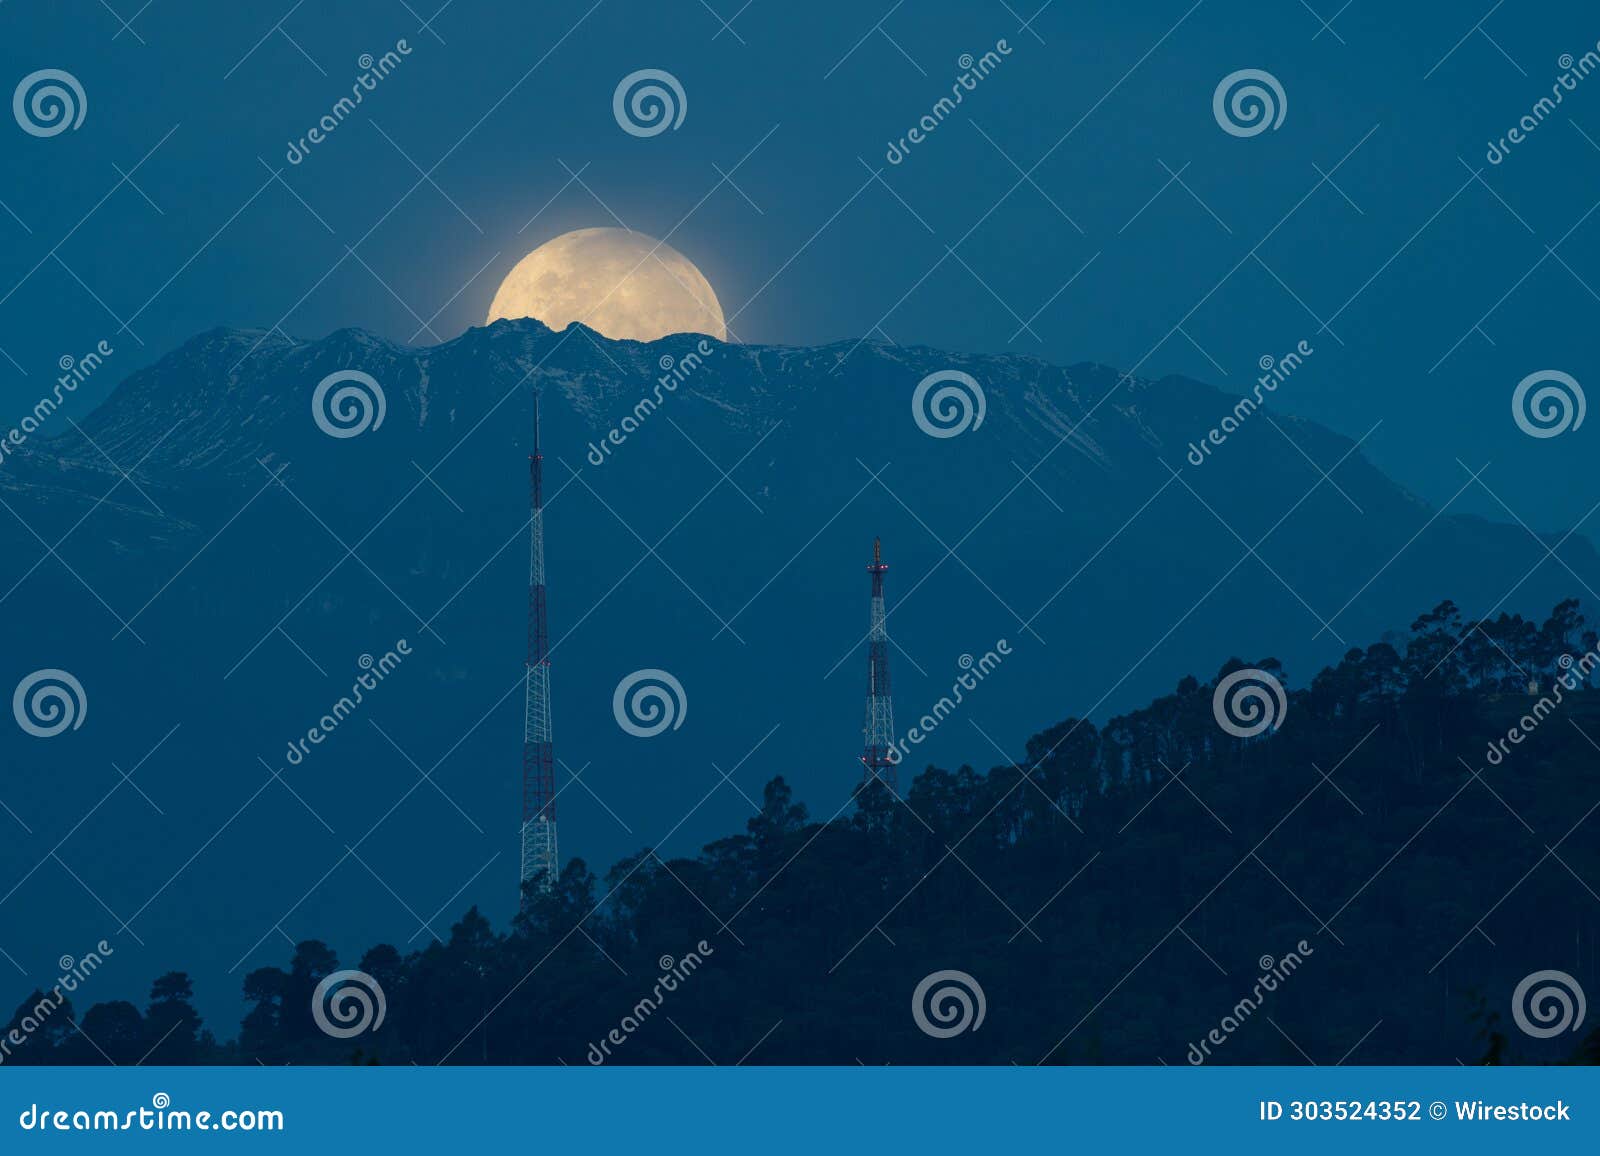 moonset in a snowy mountain in mexico.